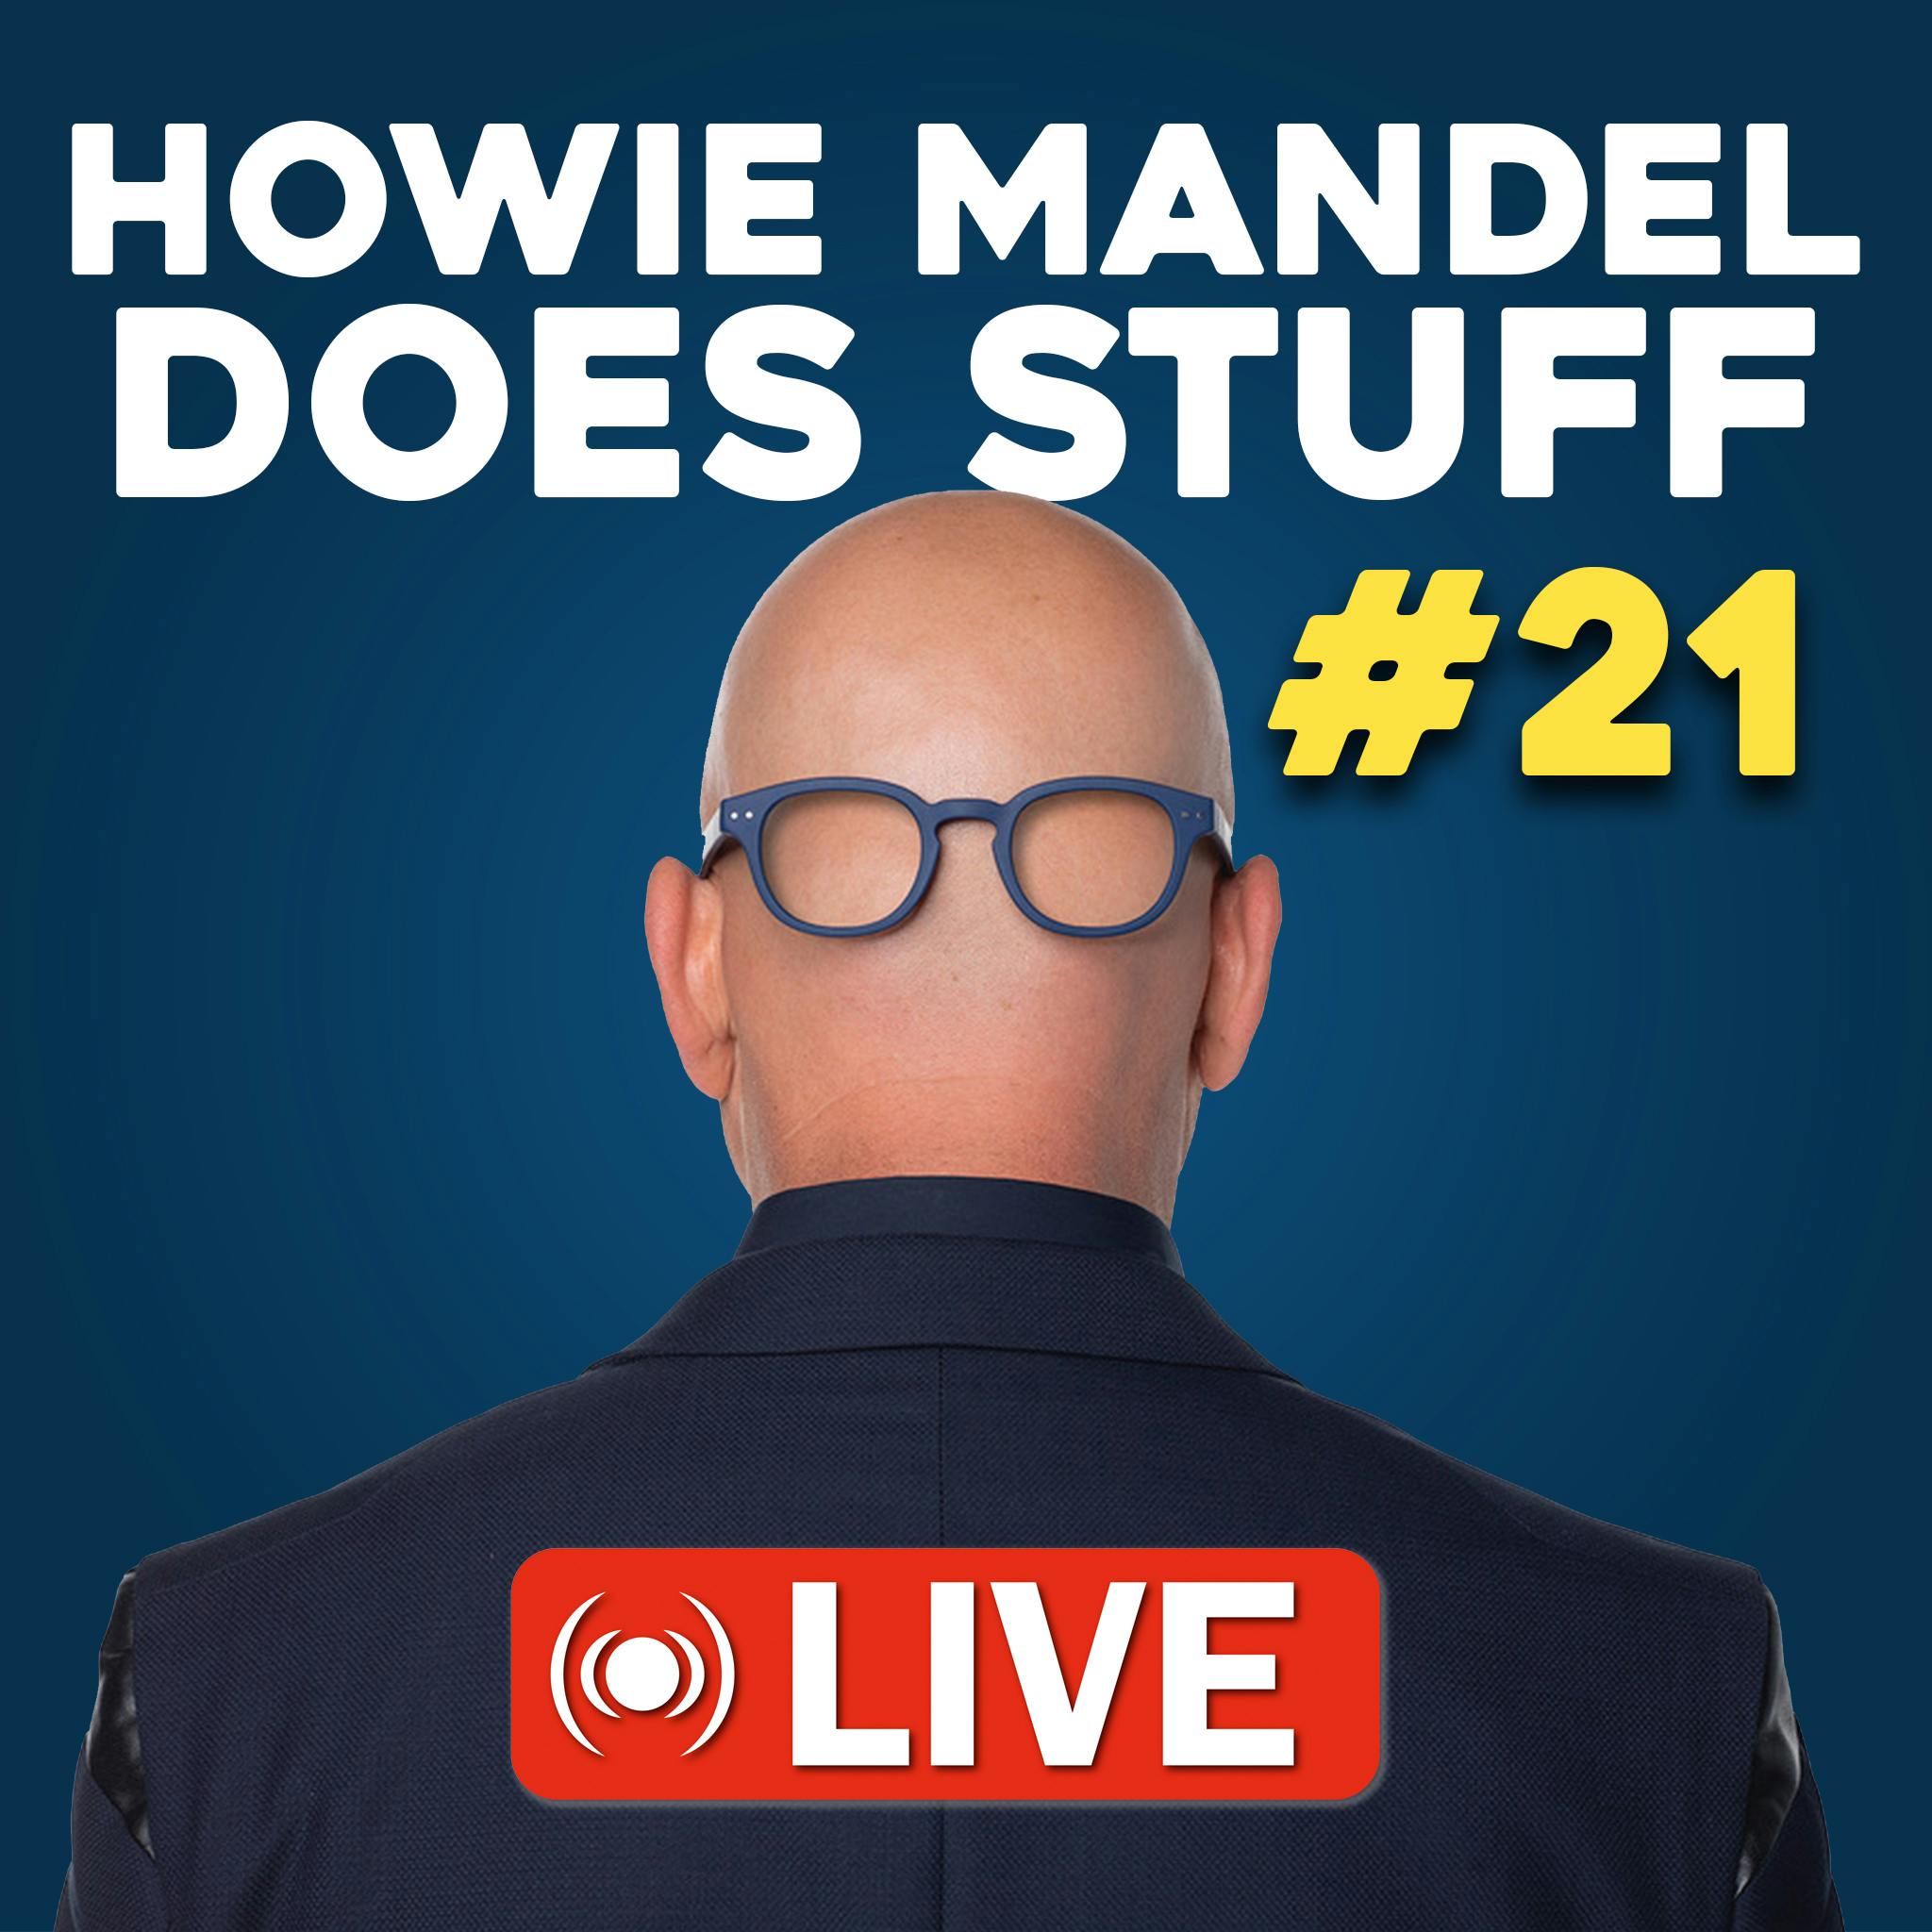 Howie Mandel Does Stuff LIVE with Lawrence the Band, Openers of Rolling Stones & Jonas Brothers